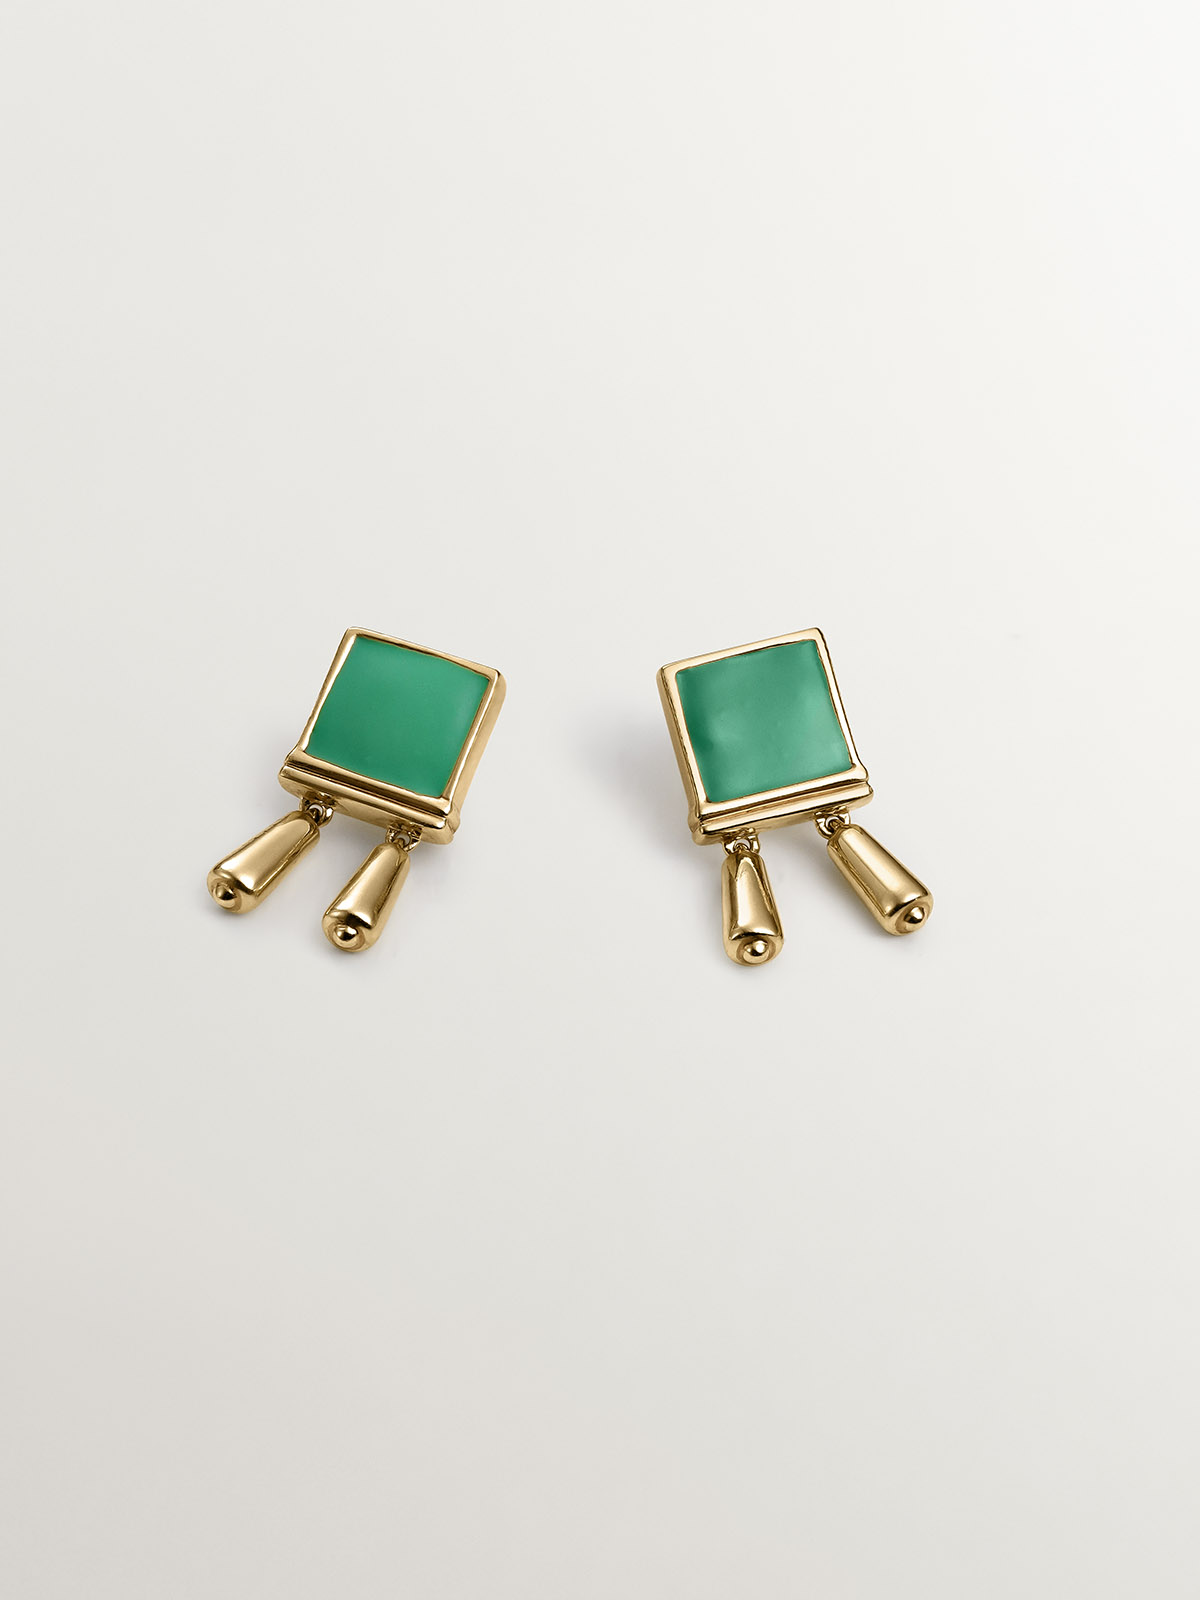 18K yellow gold plated 925 sterling silver earrings with green enamel